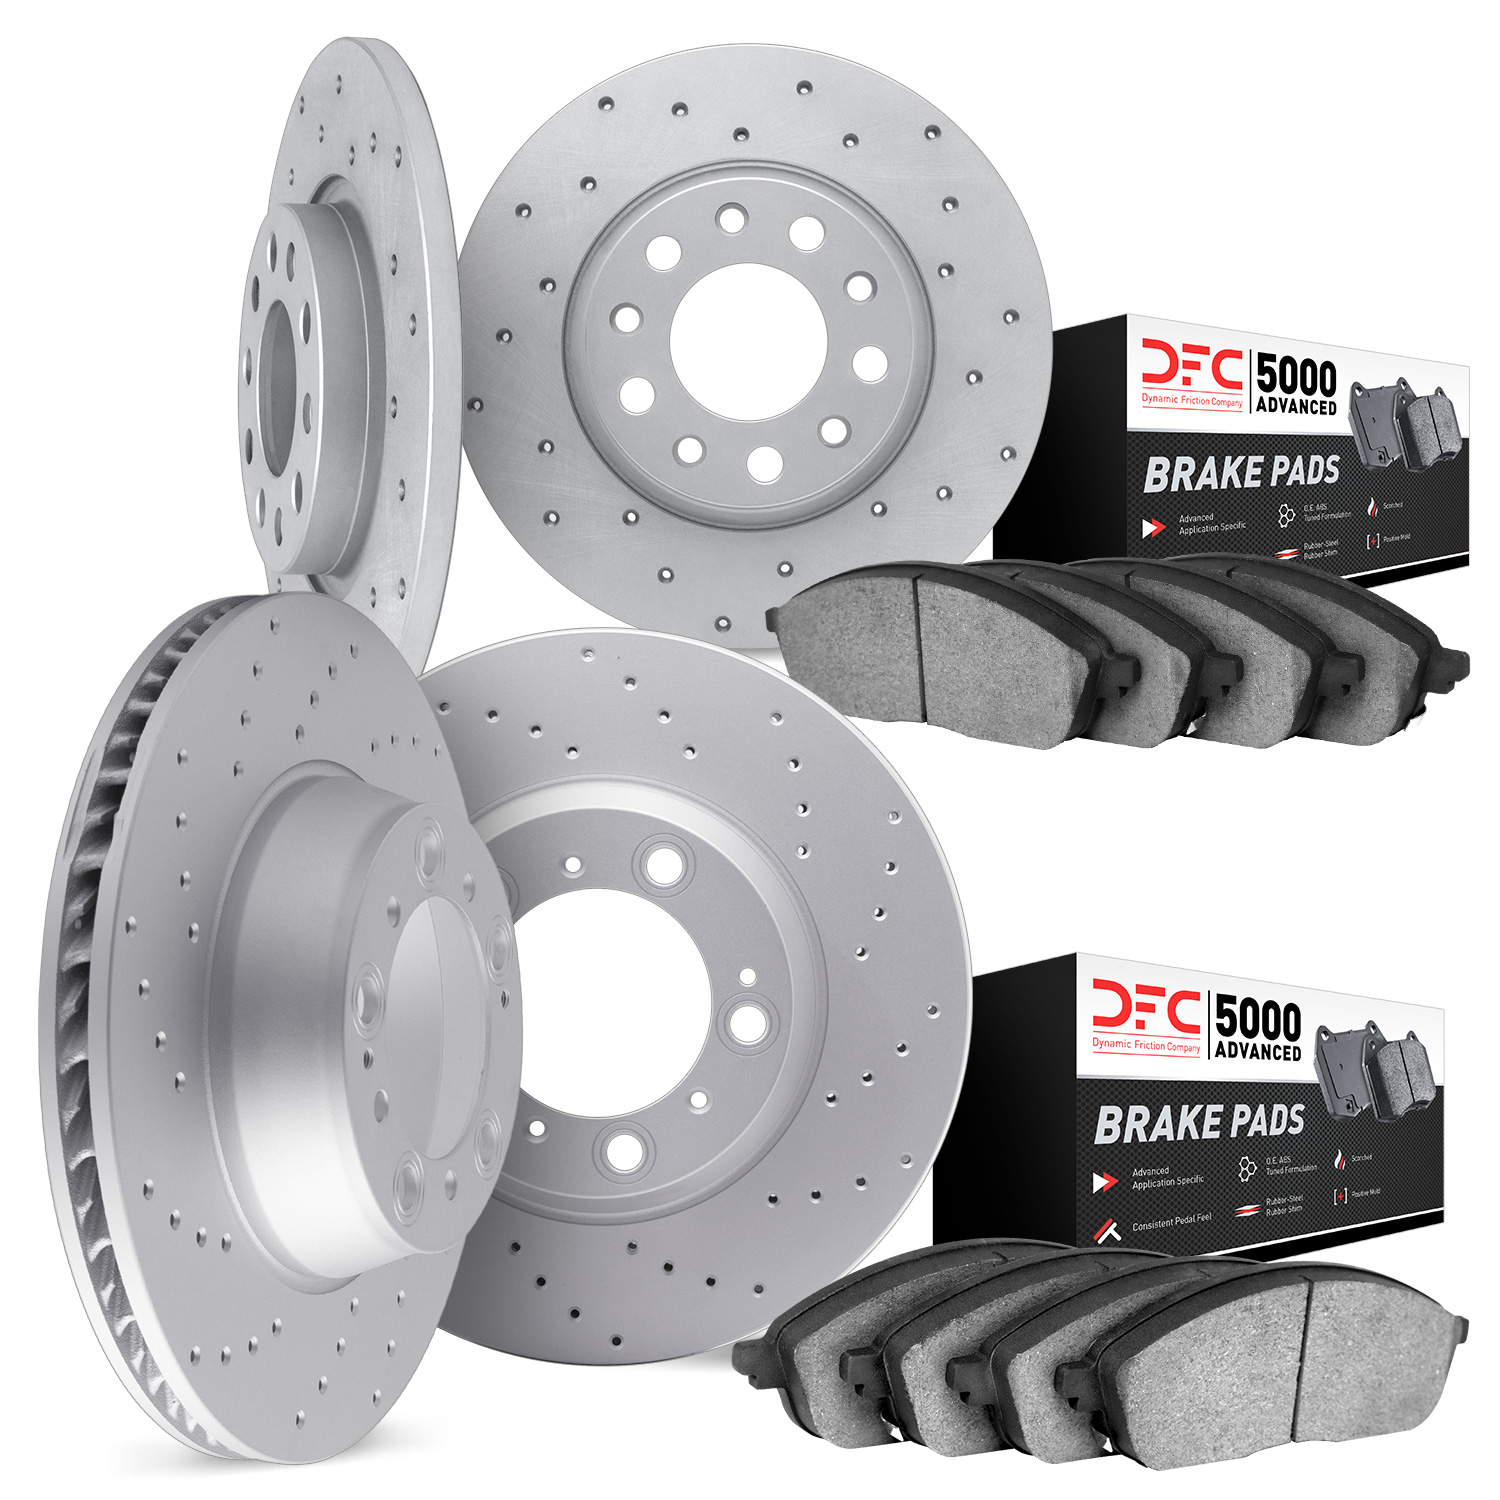 2704-54005 Geoperformance Drilled Brake Rotors with Active Performance Pads Kit, 1999-2004 Ford/Lincoln/Mercury/Mazda, Position: